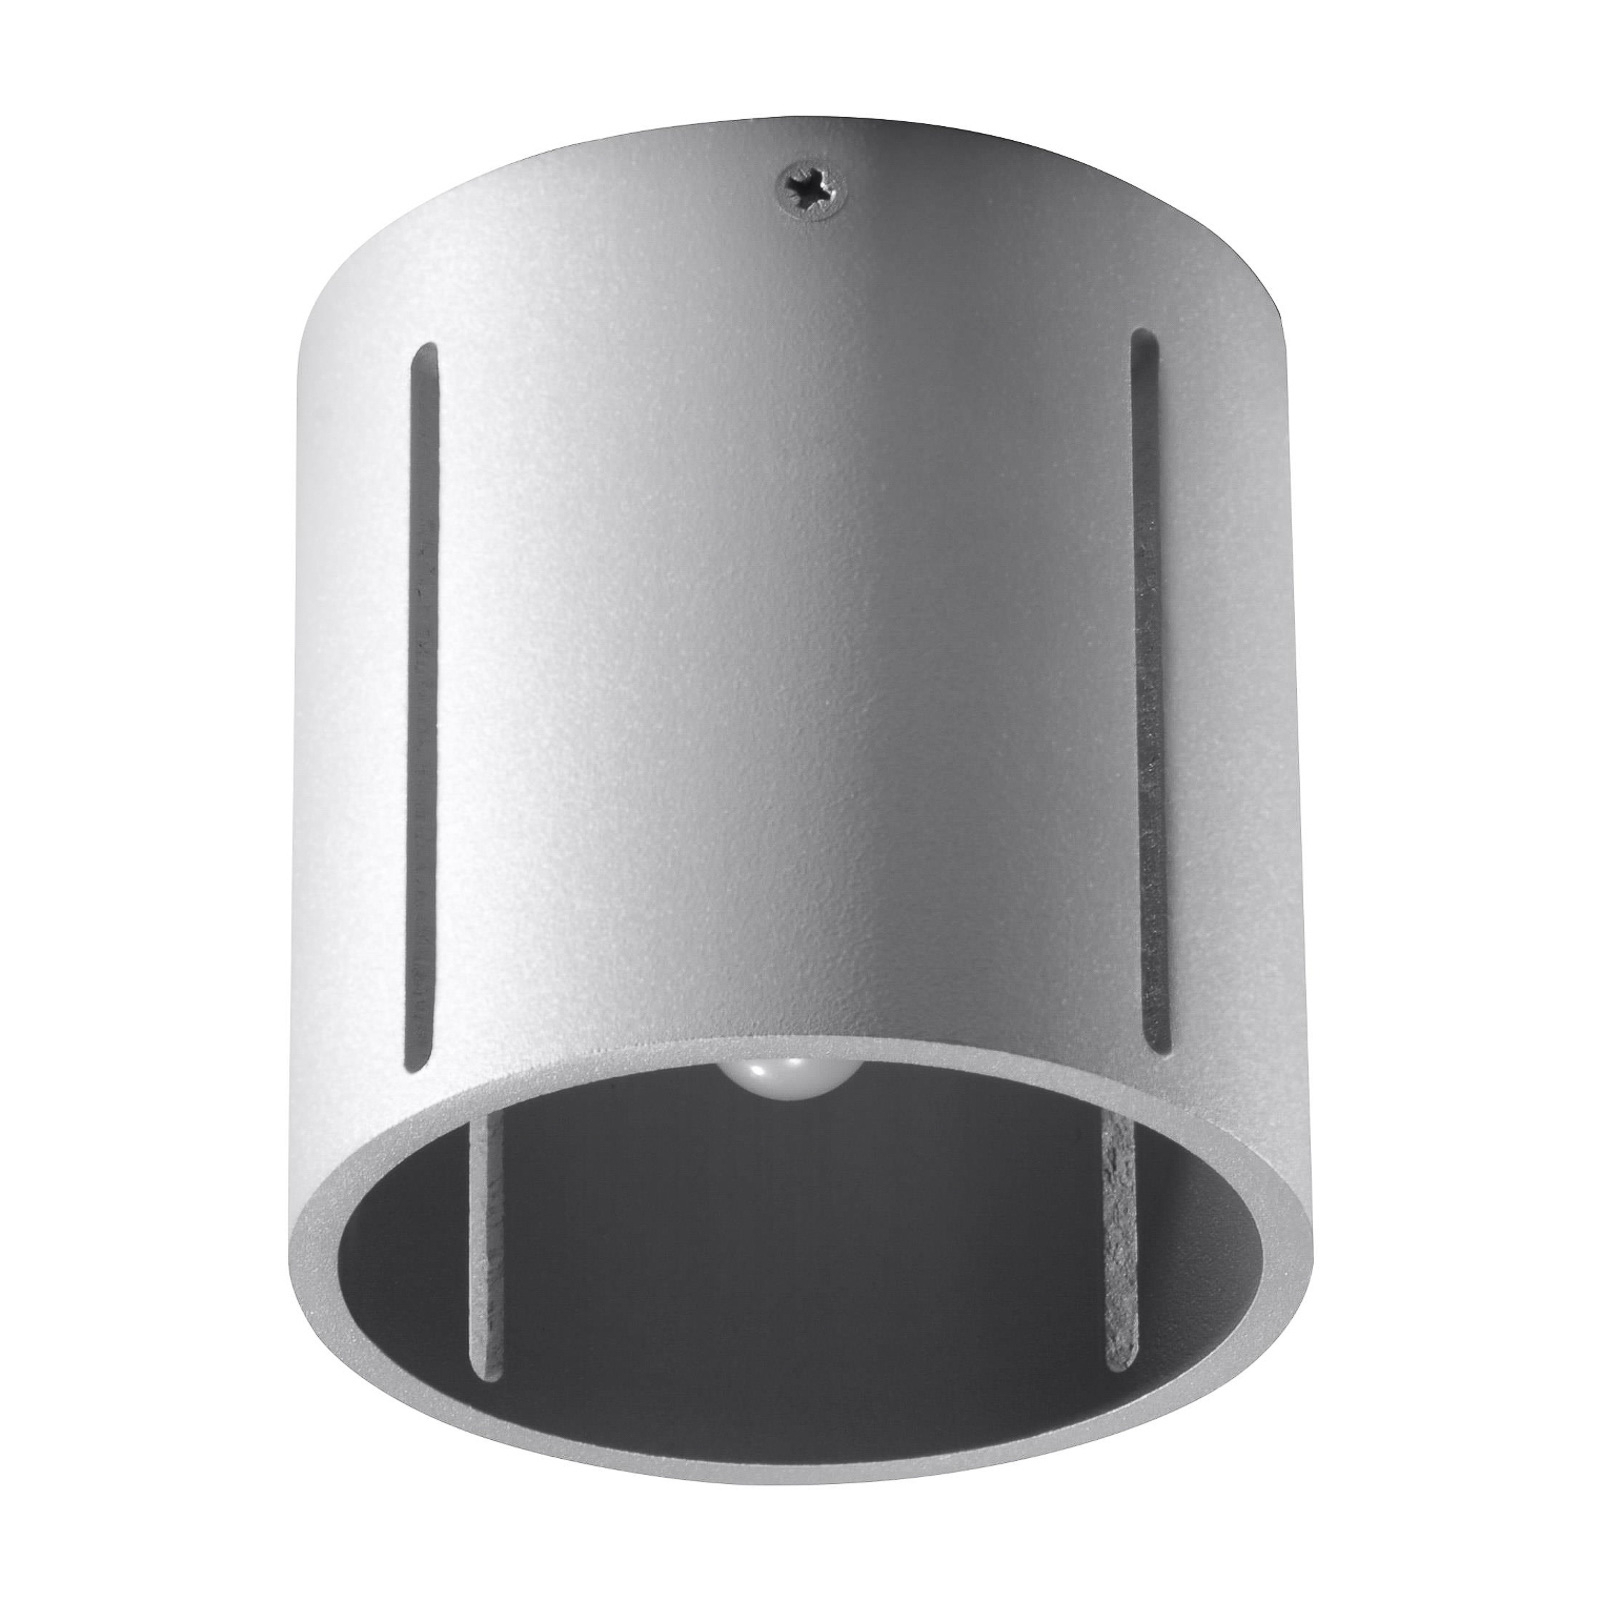 Topa ceiling light as a grey cylinder